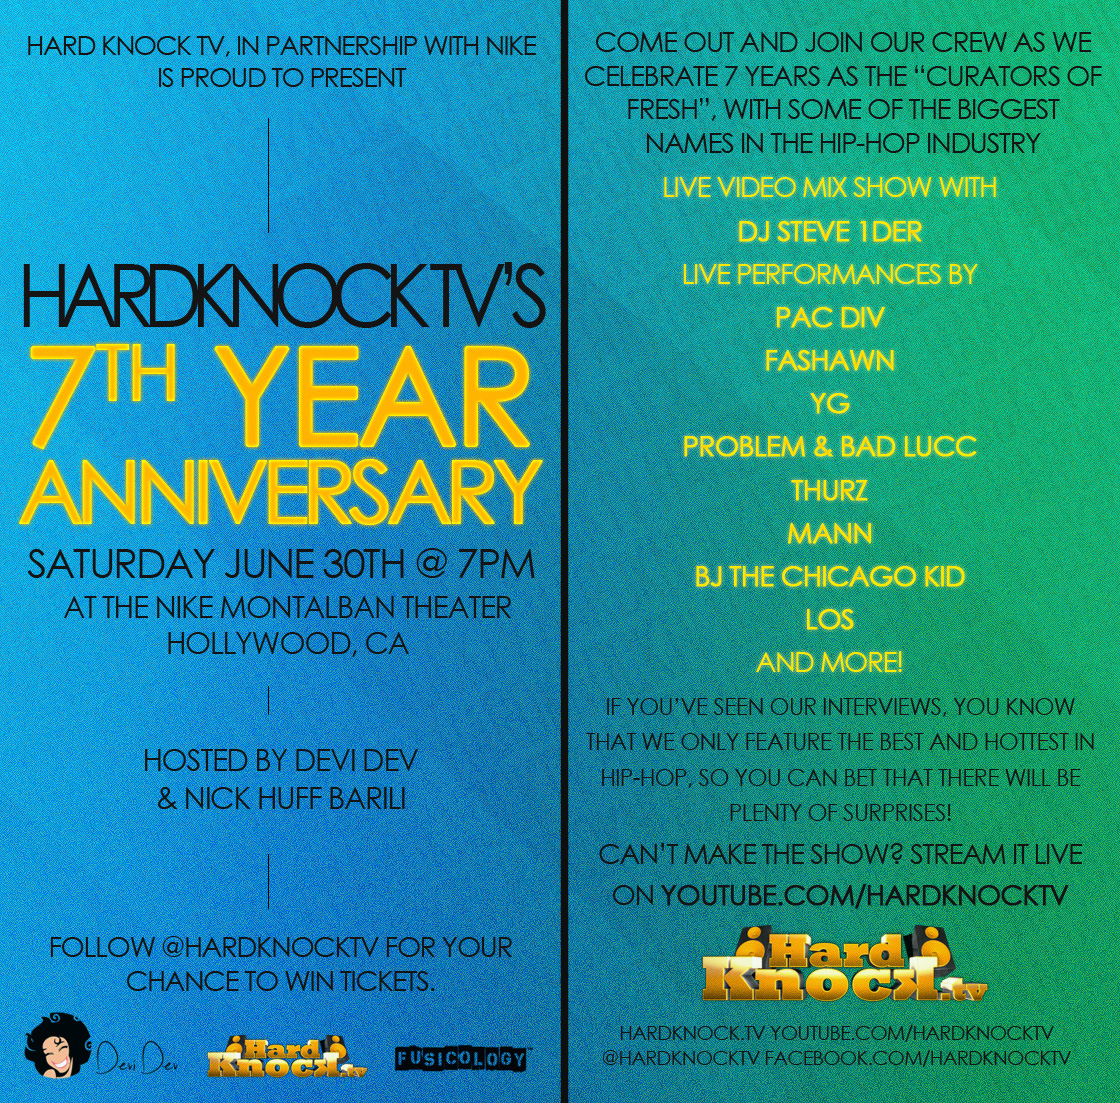 HardKnock TV’s 7th Year Anniversary Celebration w/ Pac Div, Fashawn, YG, THURZ & More (Event)